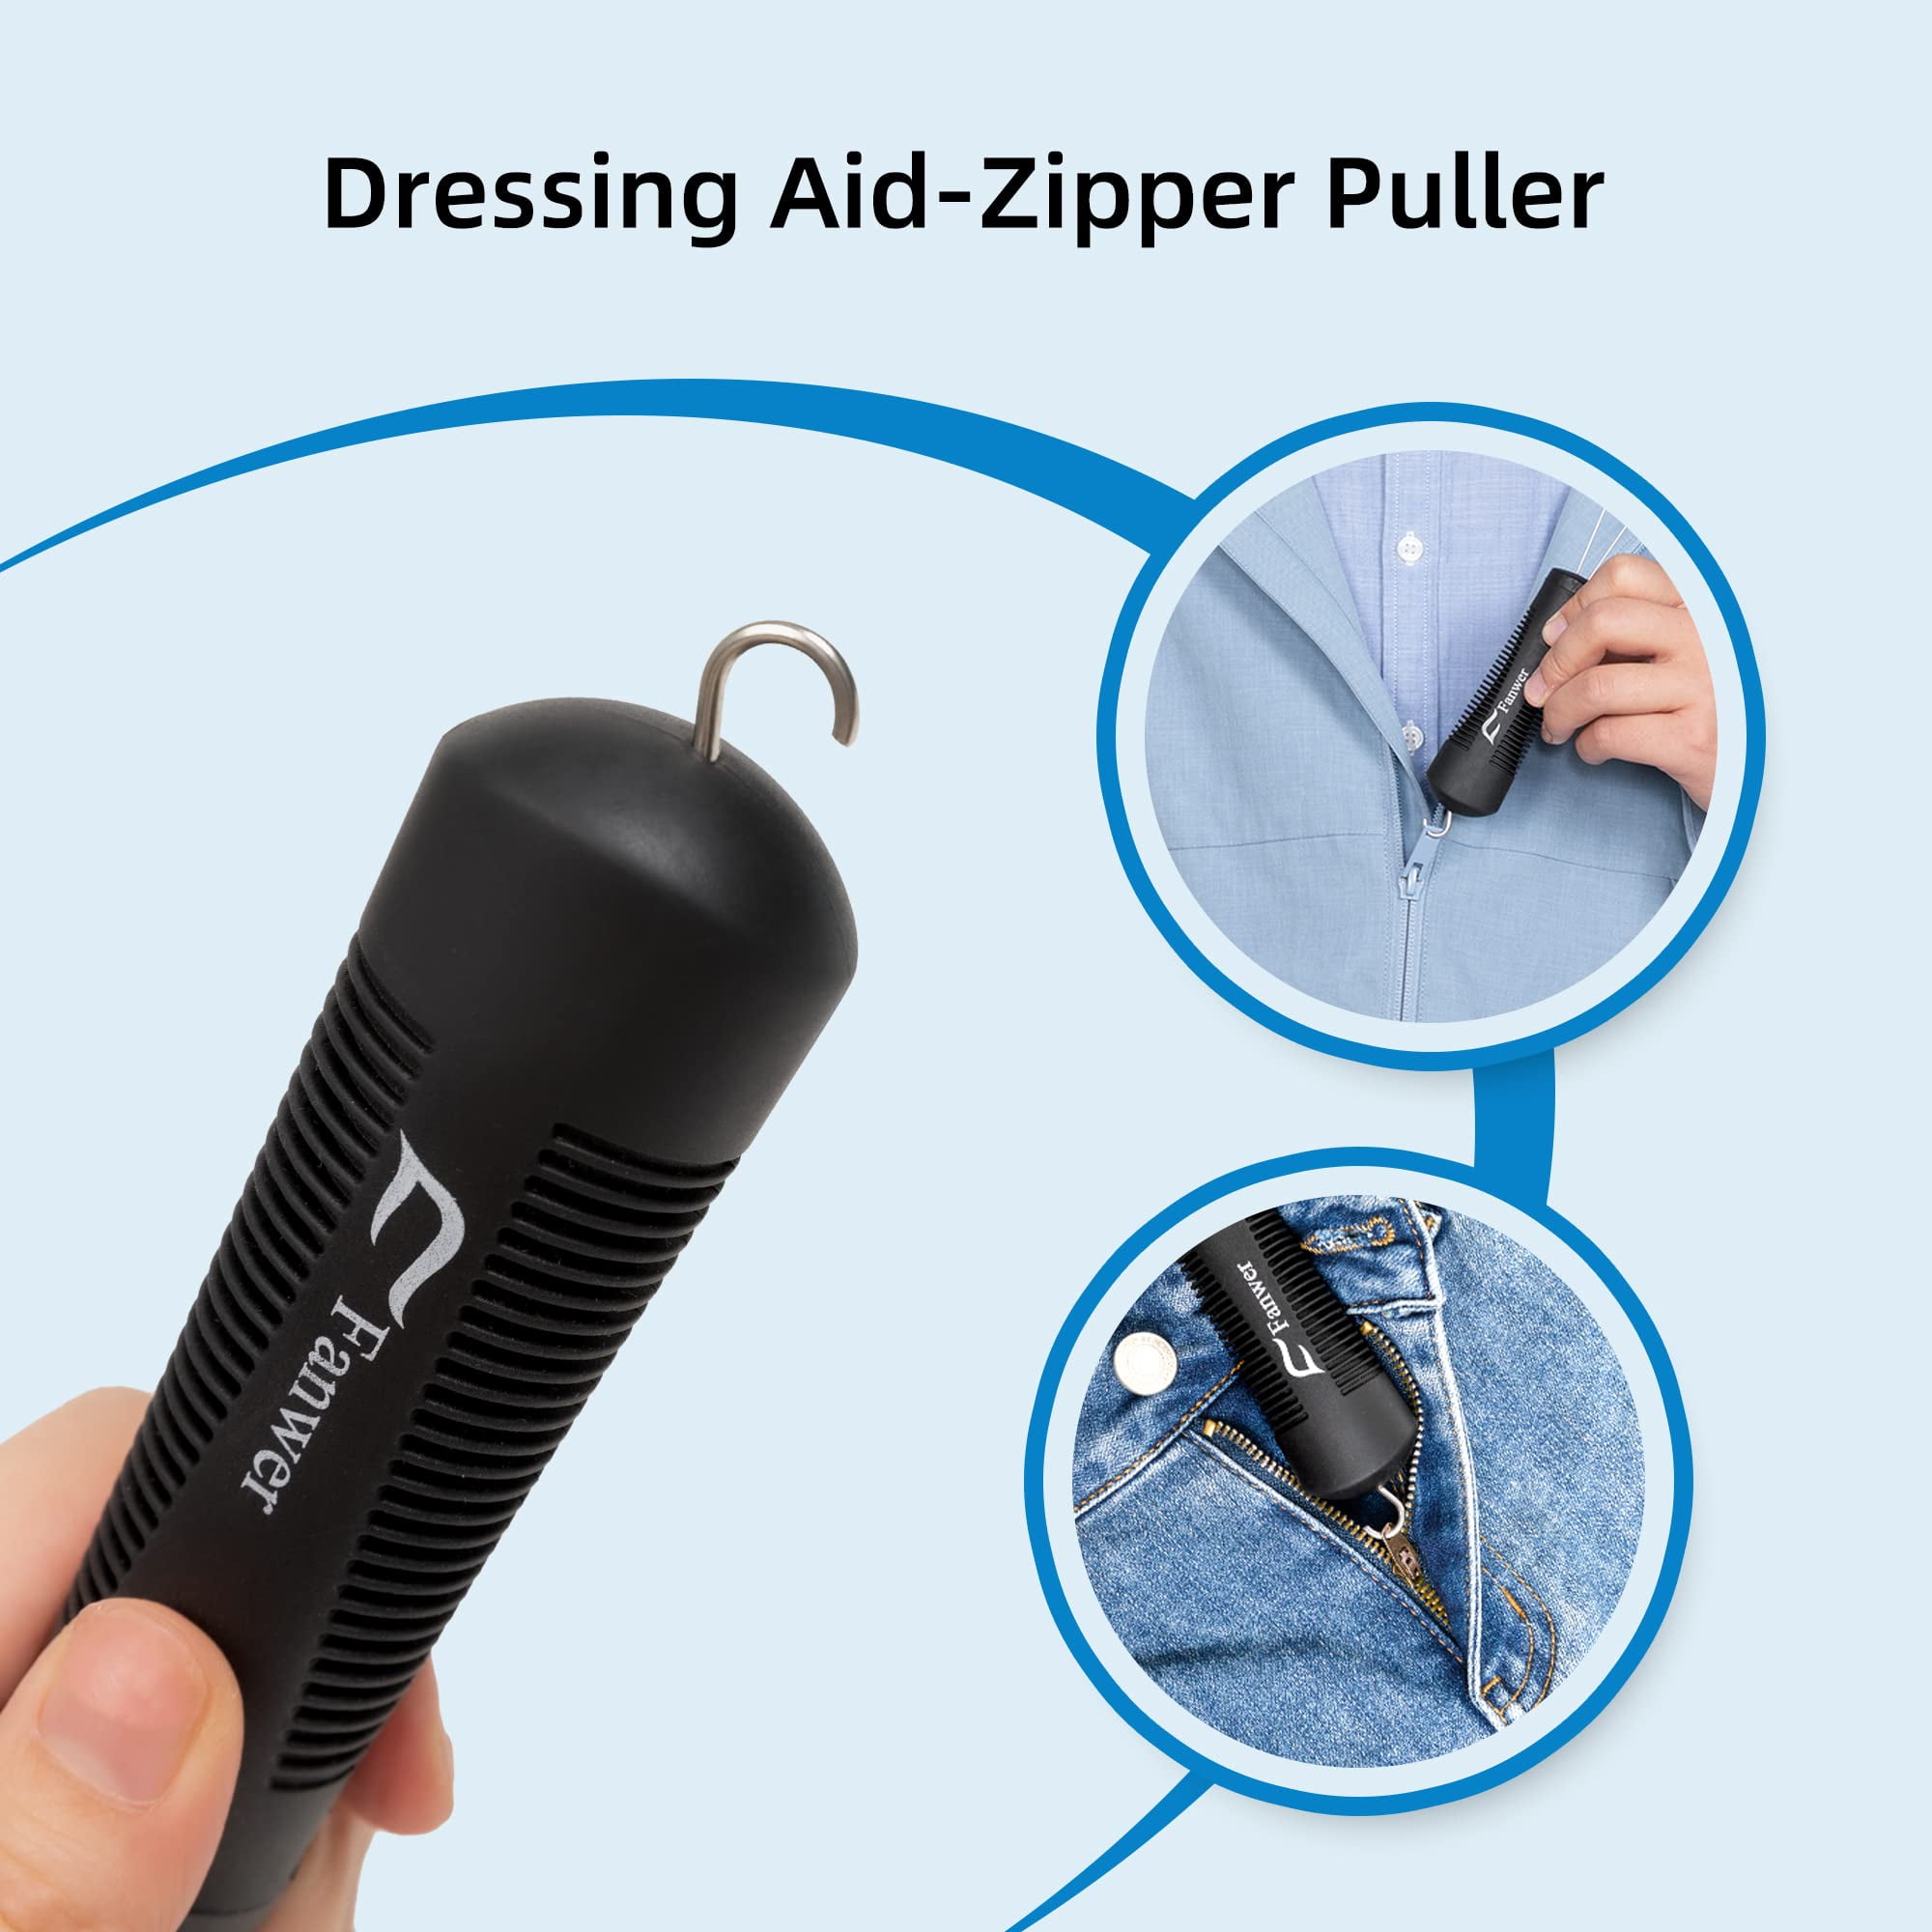 Button Hook with Zipper Pull Button Assist Device Button Hook Dressing Aid  with Comfort Wide Grip, Shirt Coat Buttoning Aid Ideal for Limited